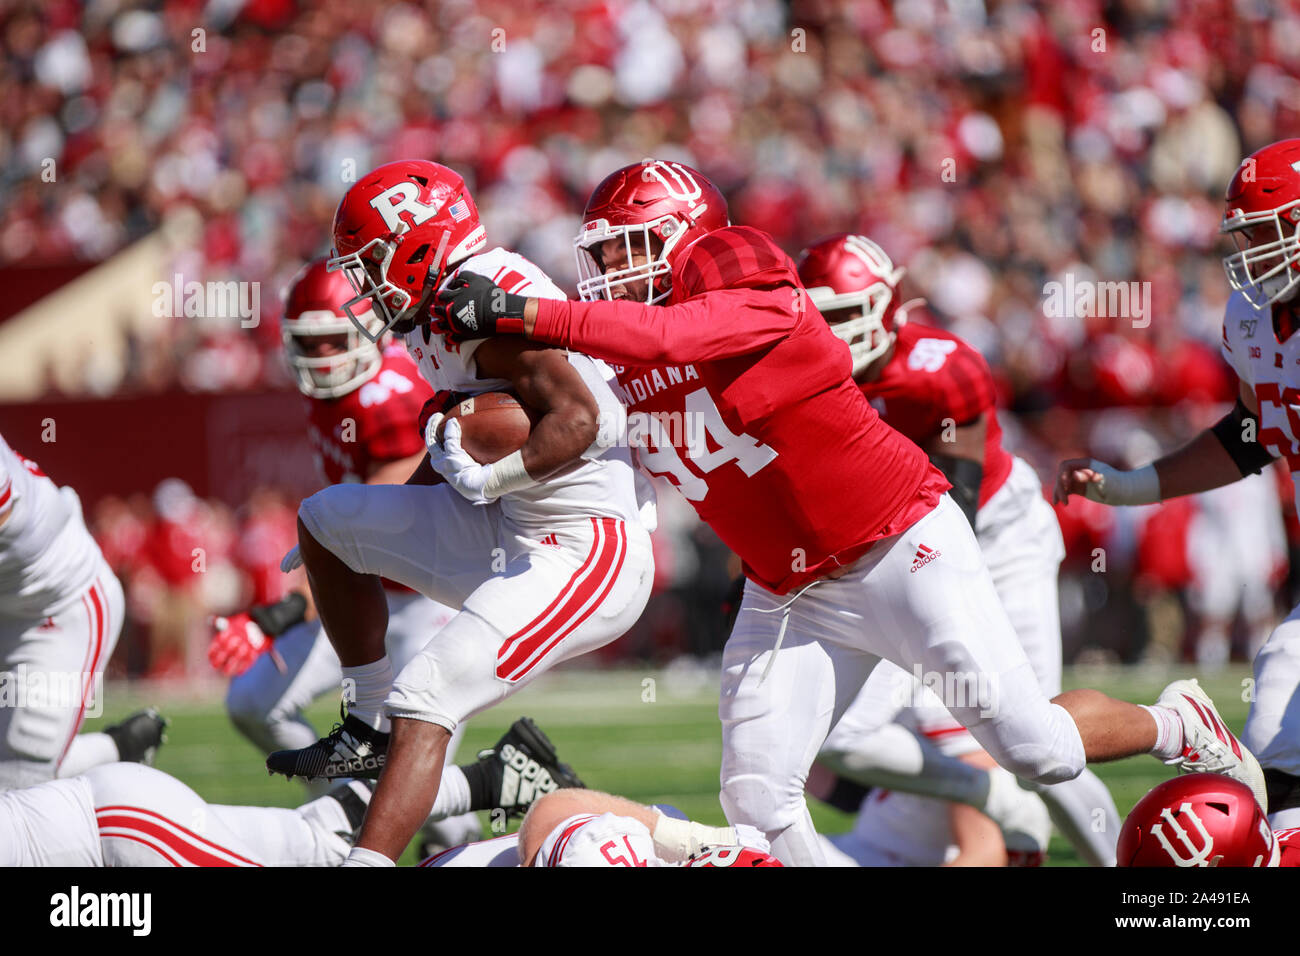 Bloomington, USA. 12th Oct, 2019. Rutgers' Isaih Pacheco (1) is tackled by Indiana University's Demarcus Elliott (4) during the NCAA football game at Memorial Stadium in Bloomington.The Indiana Hoosiers beat the Rutgers Scarlet Kings 35-0. Credit: SOPA Images Limited/Alamy Live News Stock Photo